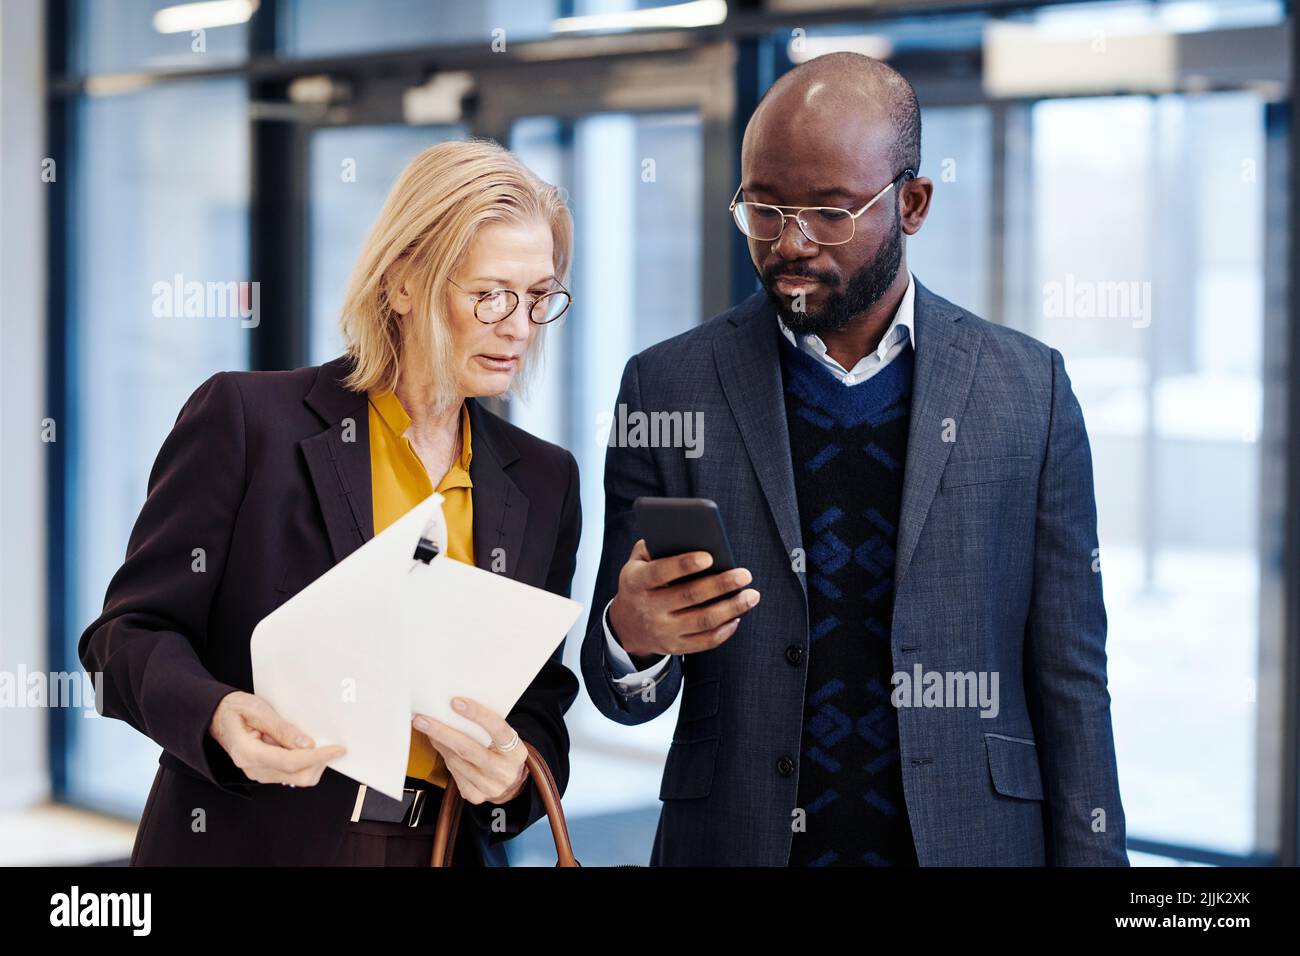 Mature female lawyer with documents discussing the deal with her colleague while he using his mobile phone before the meeting Stock Photo